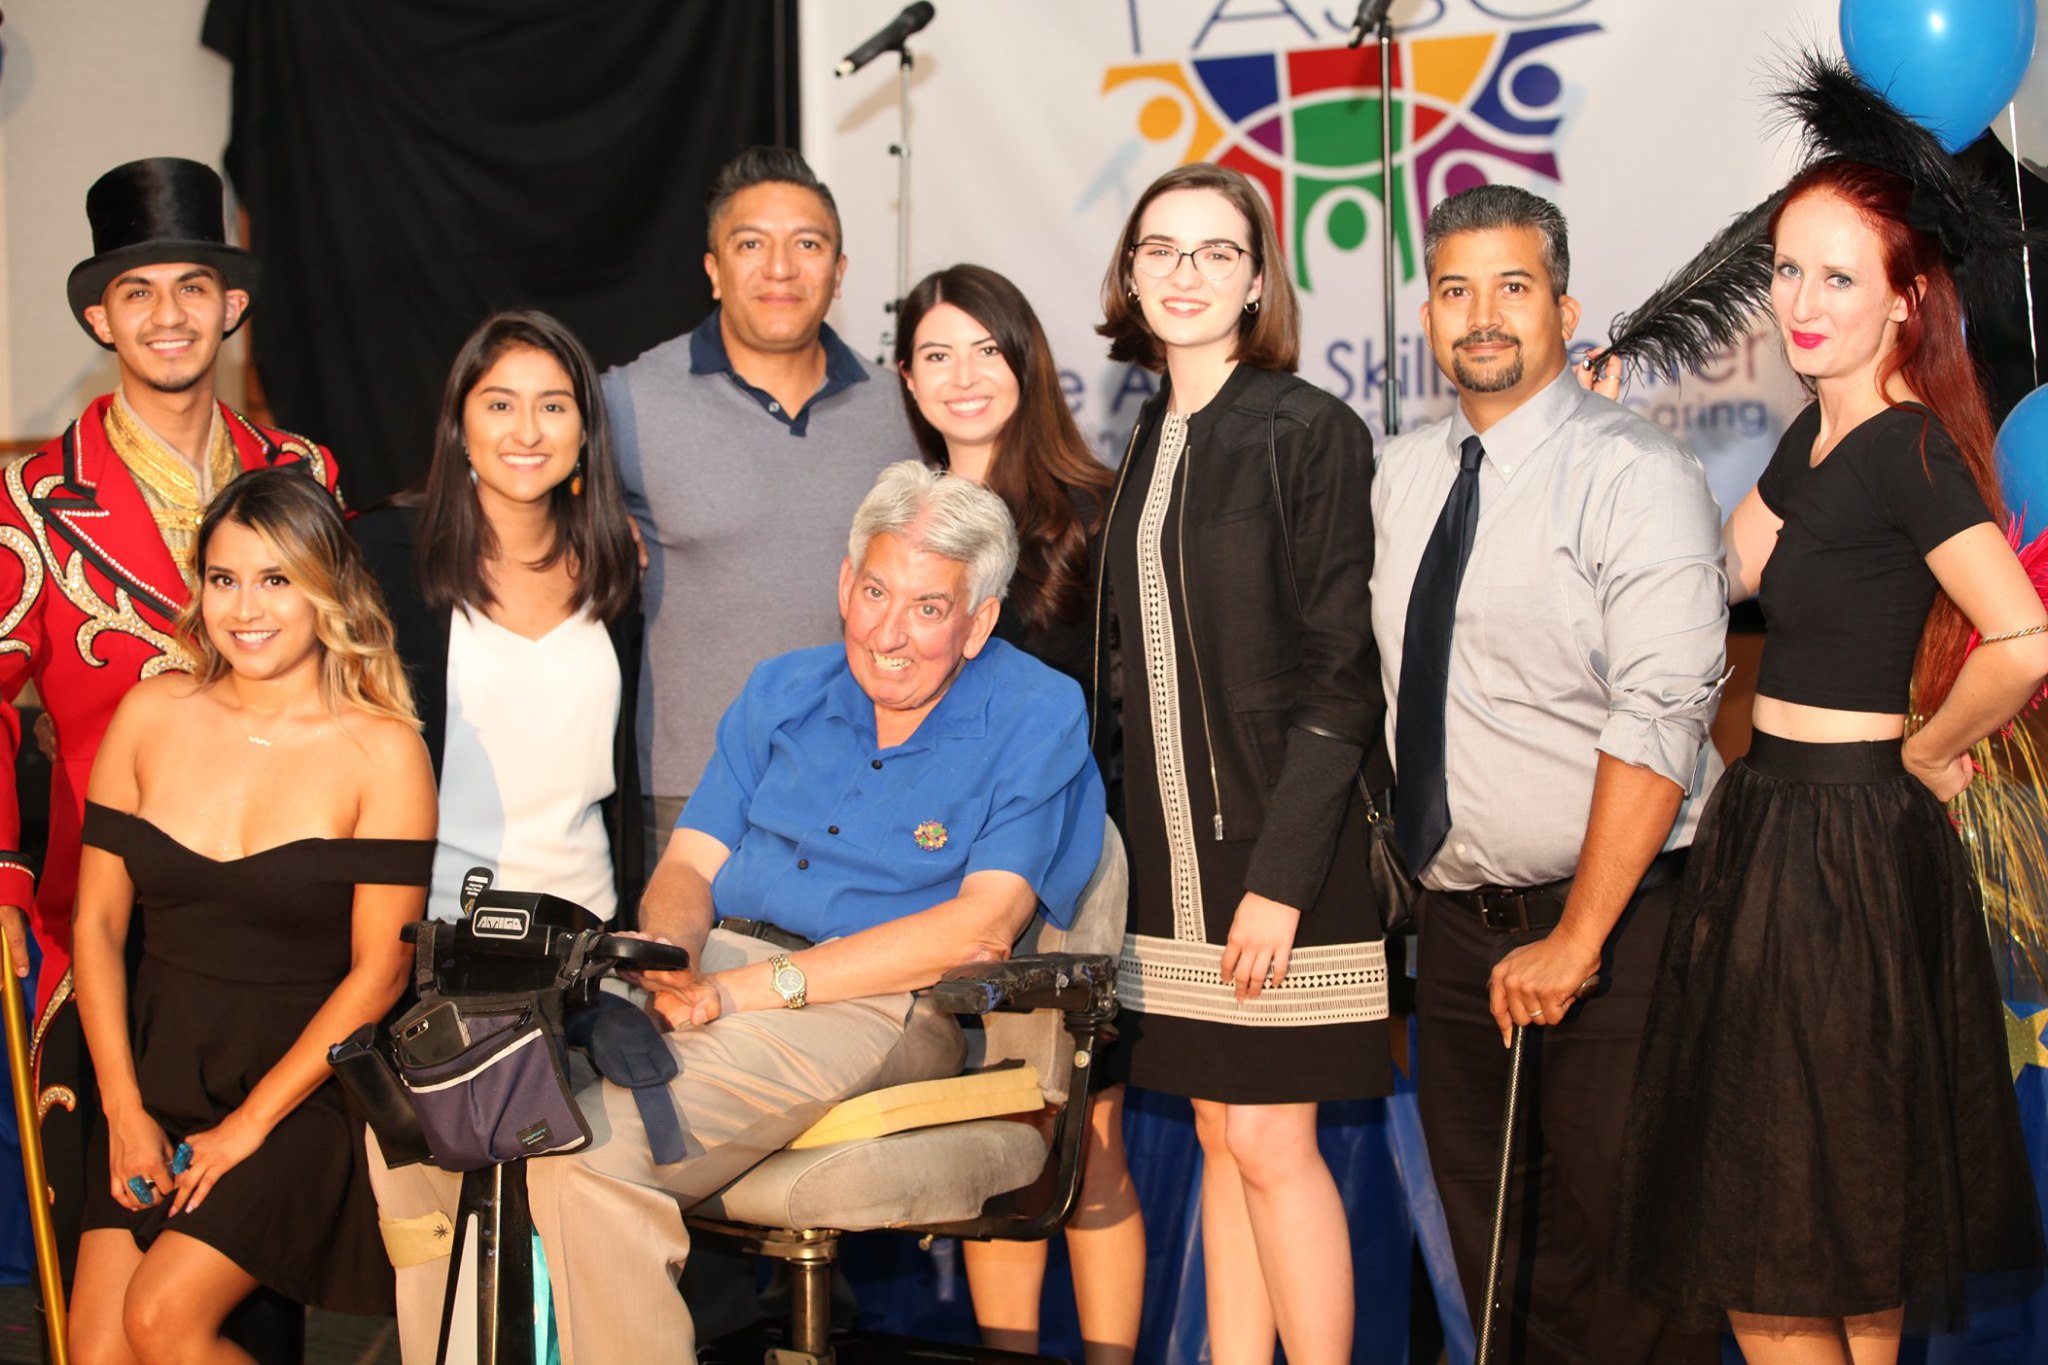 Representatives, Board Members, Employees At TASC During Concert Fundraiser 2019